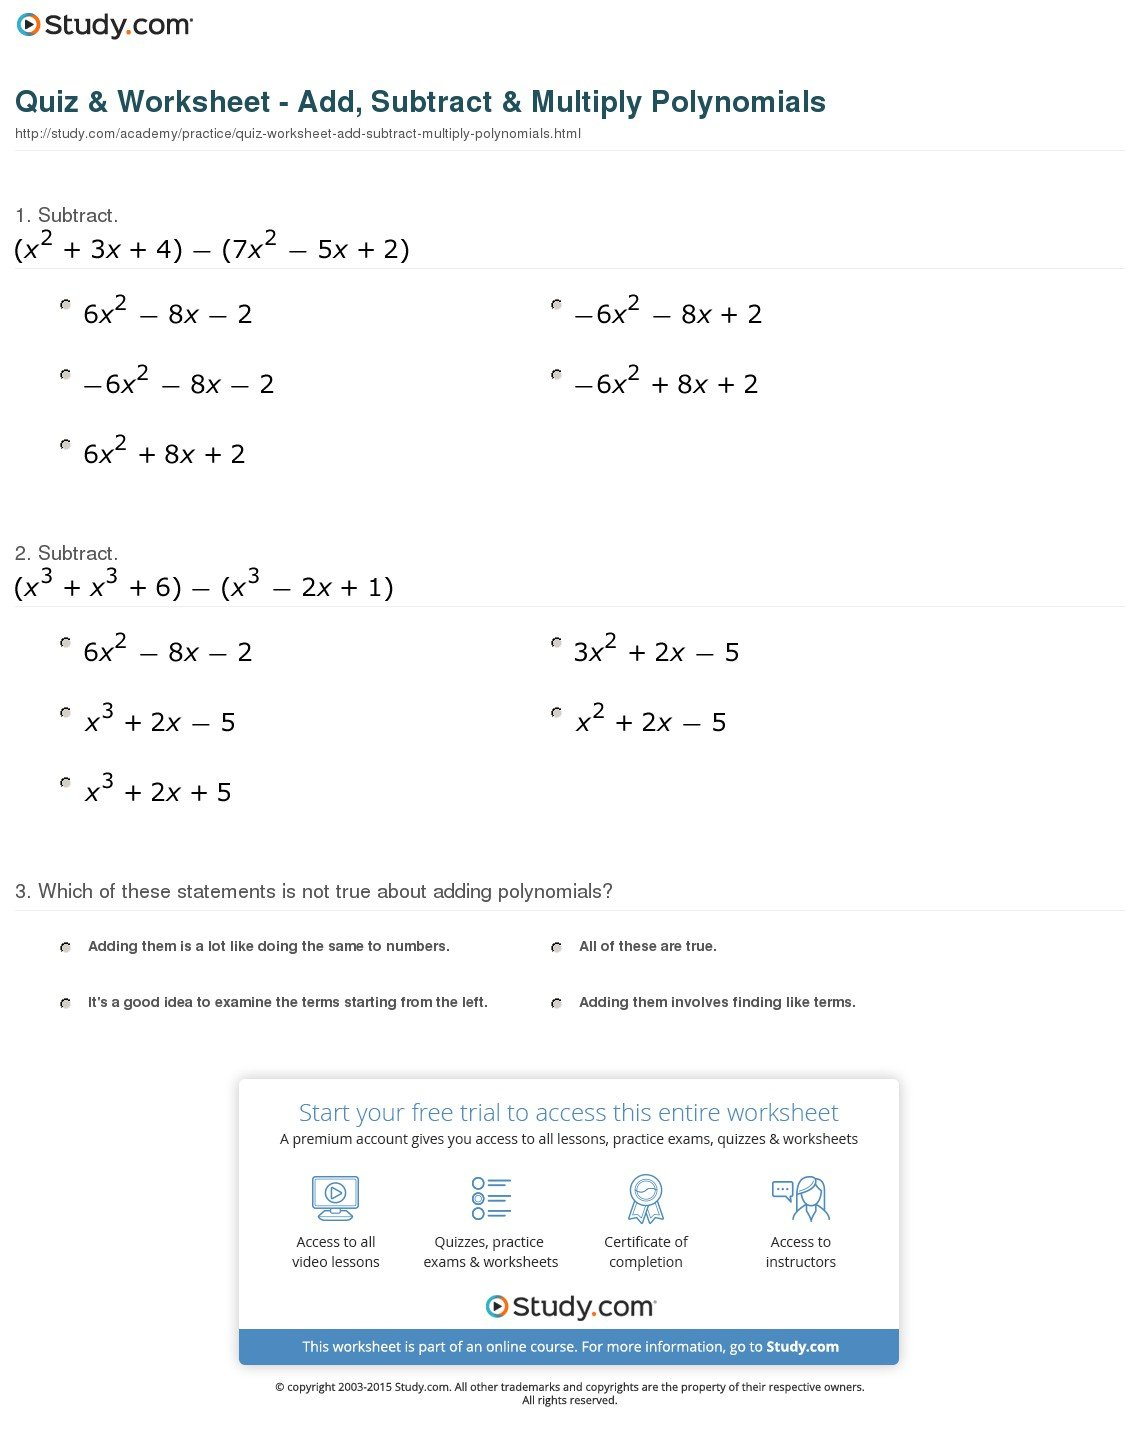 Quiz  Worksheet  Add Subtract  Multiply Polynomials  Study Or Polynomials Worksheet With Answers